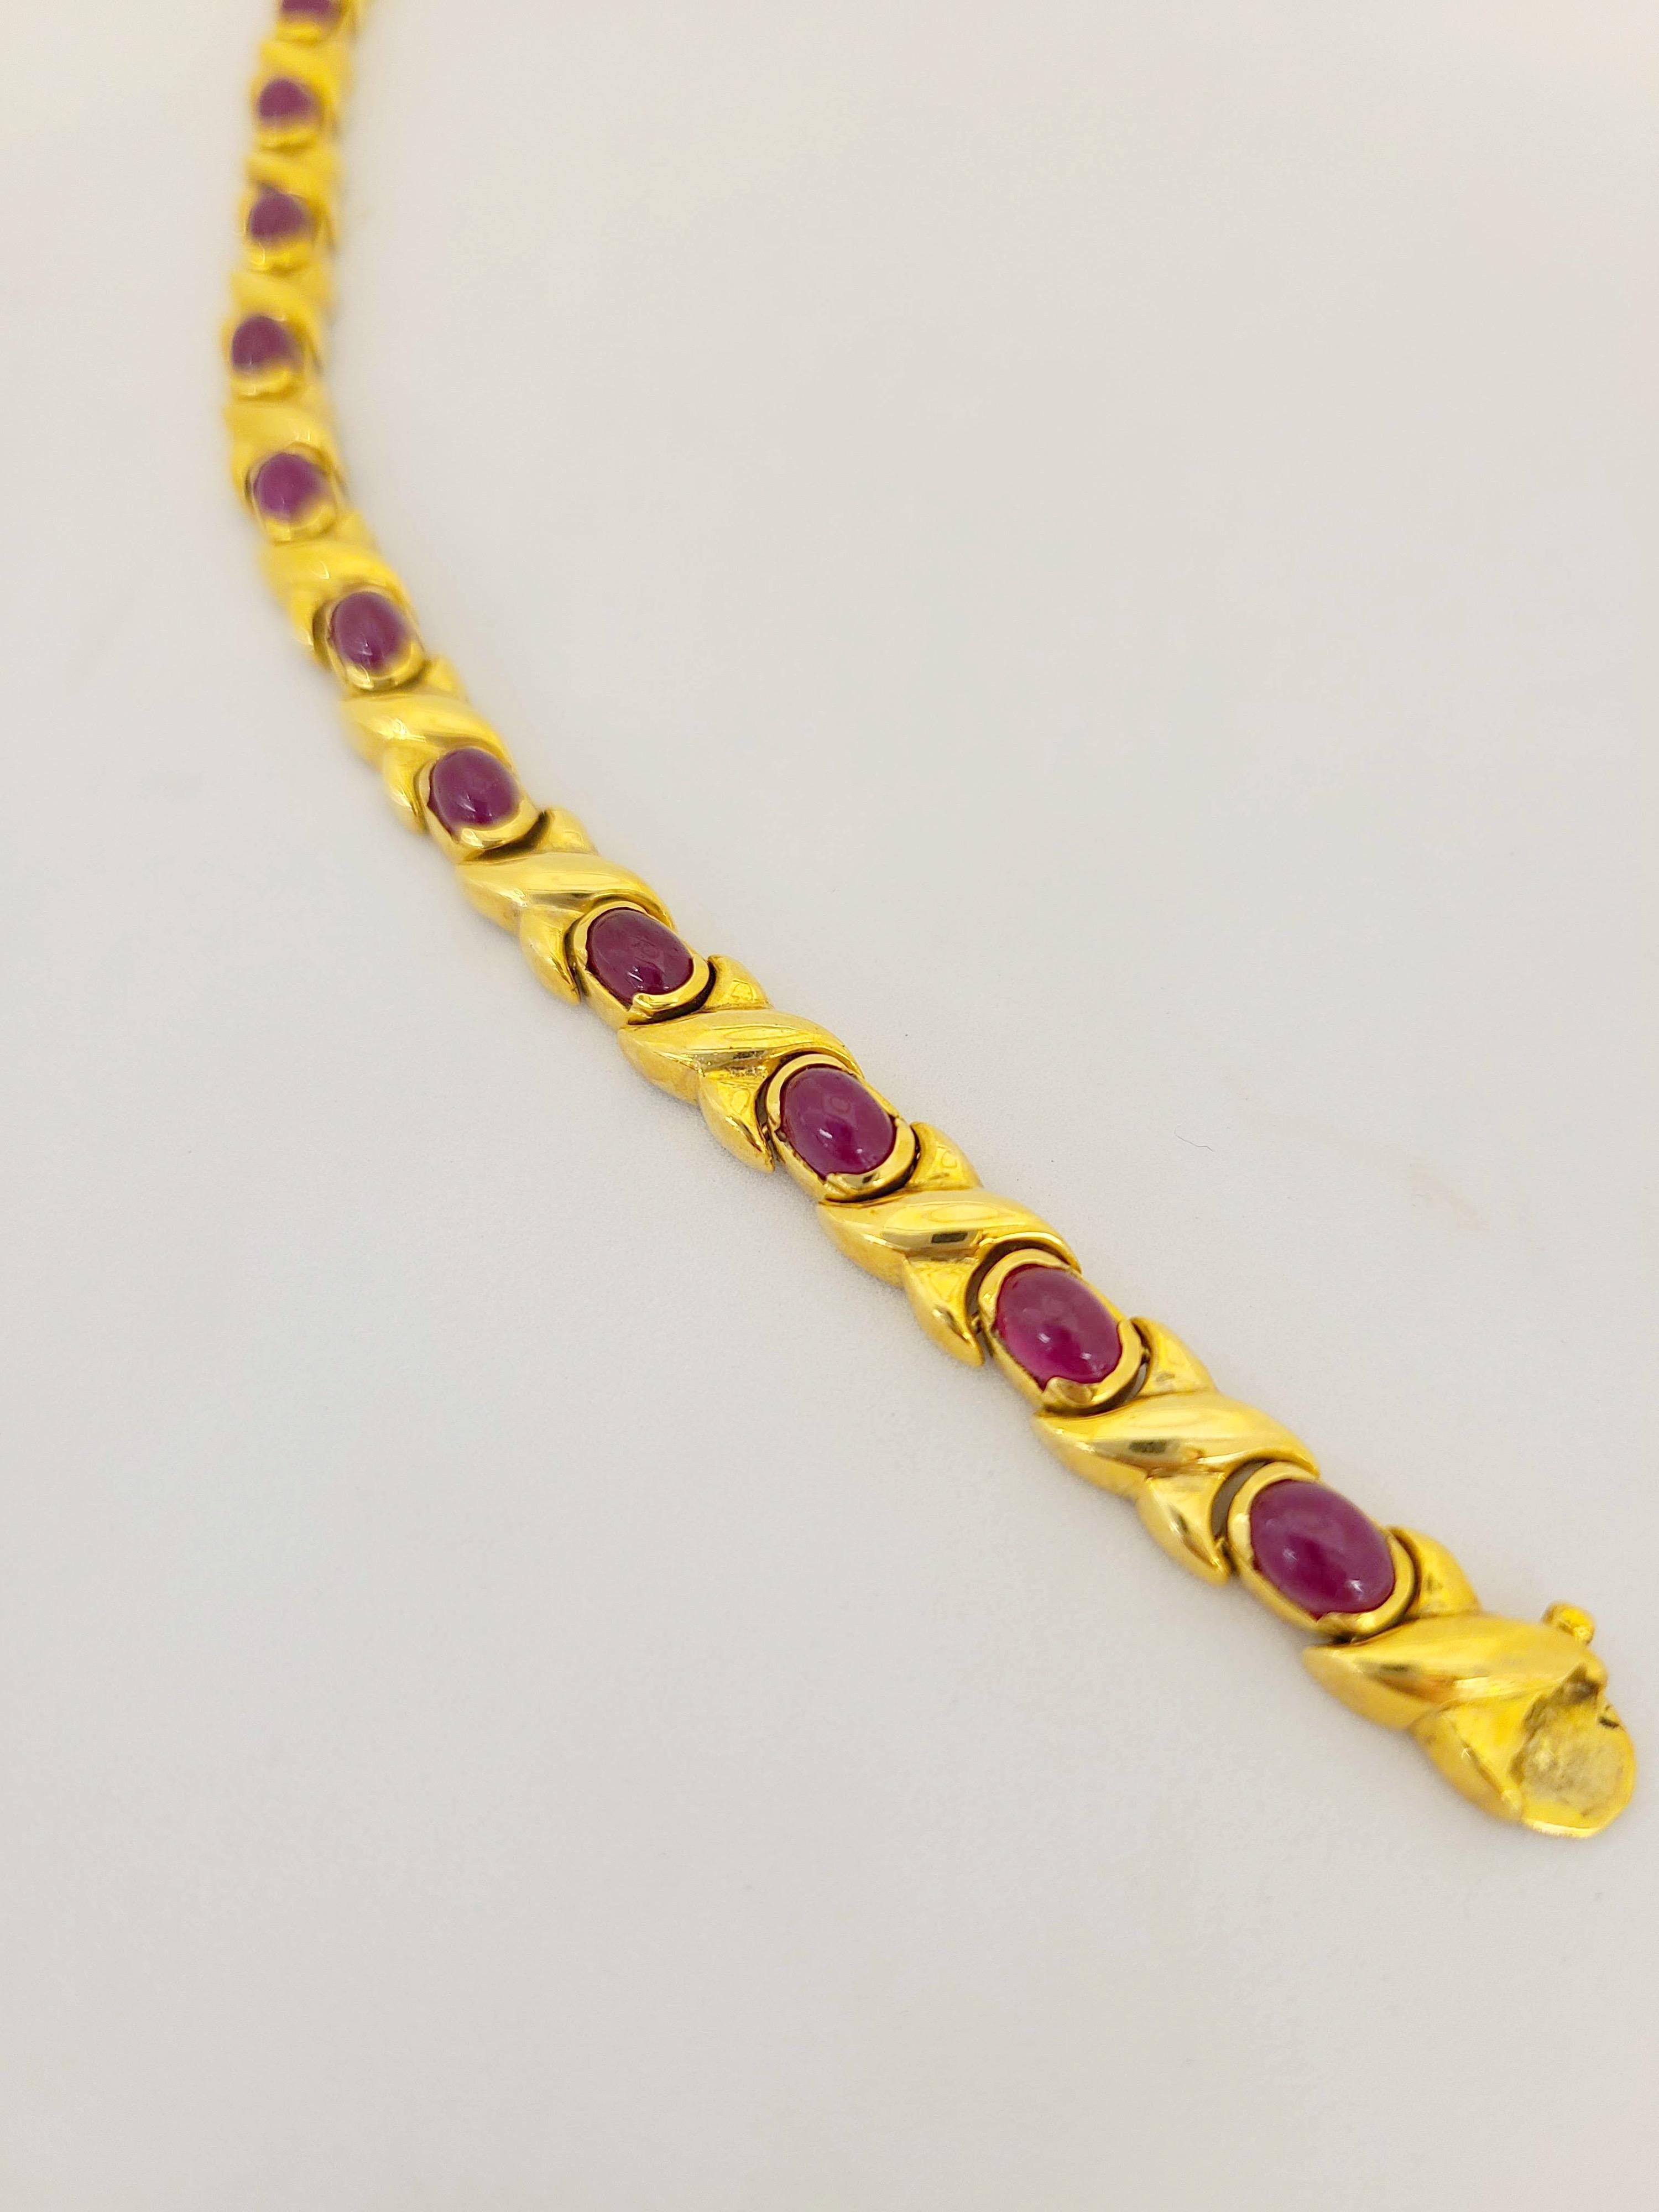 Classic line bracelet designed in 18 karat yellow gold set with 14 cabochon oval rubies. The rubies are bezel set and alternate with a gold crisscross link. The bracelet measures 7.5